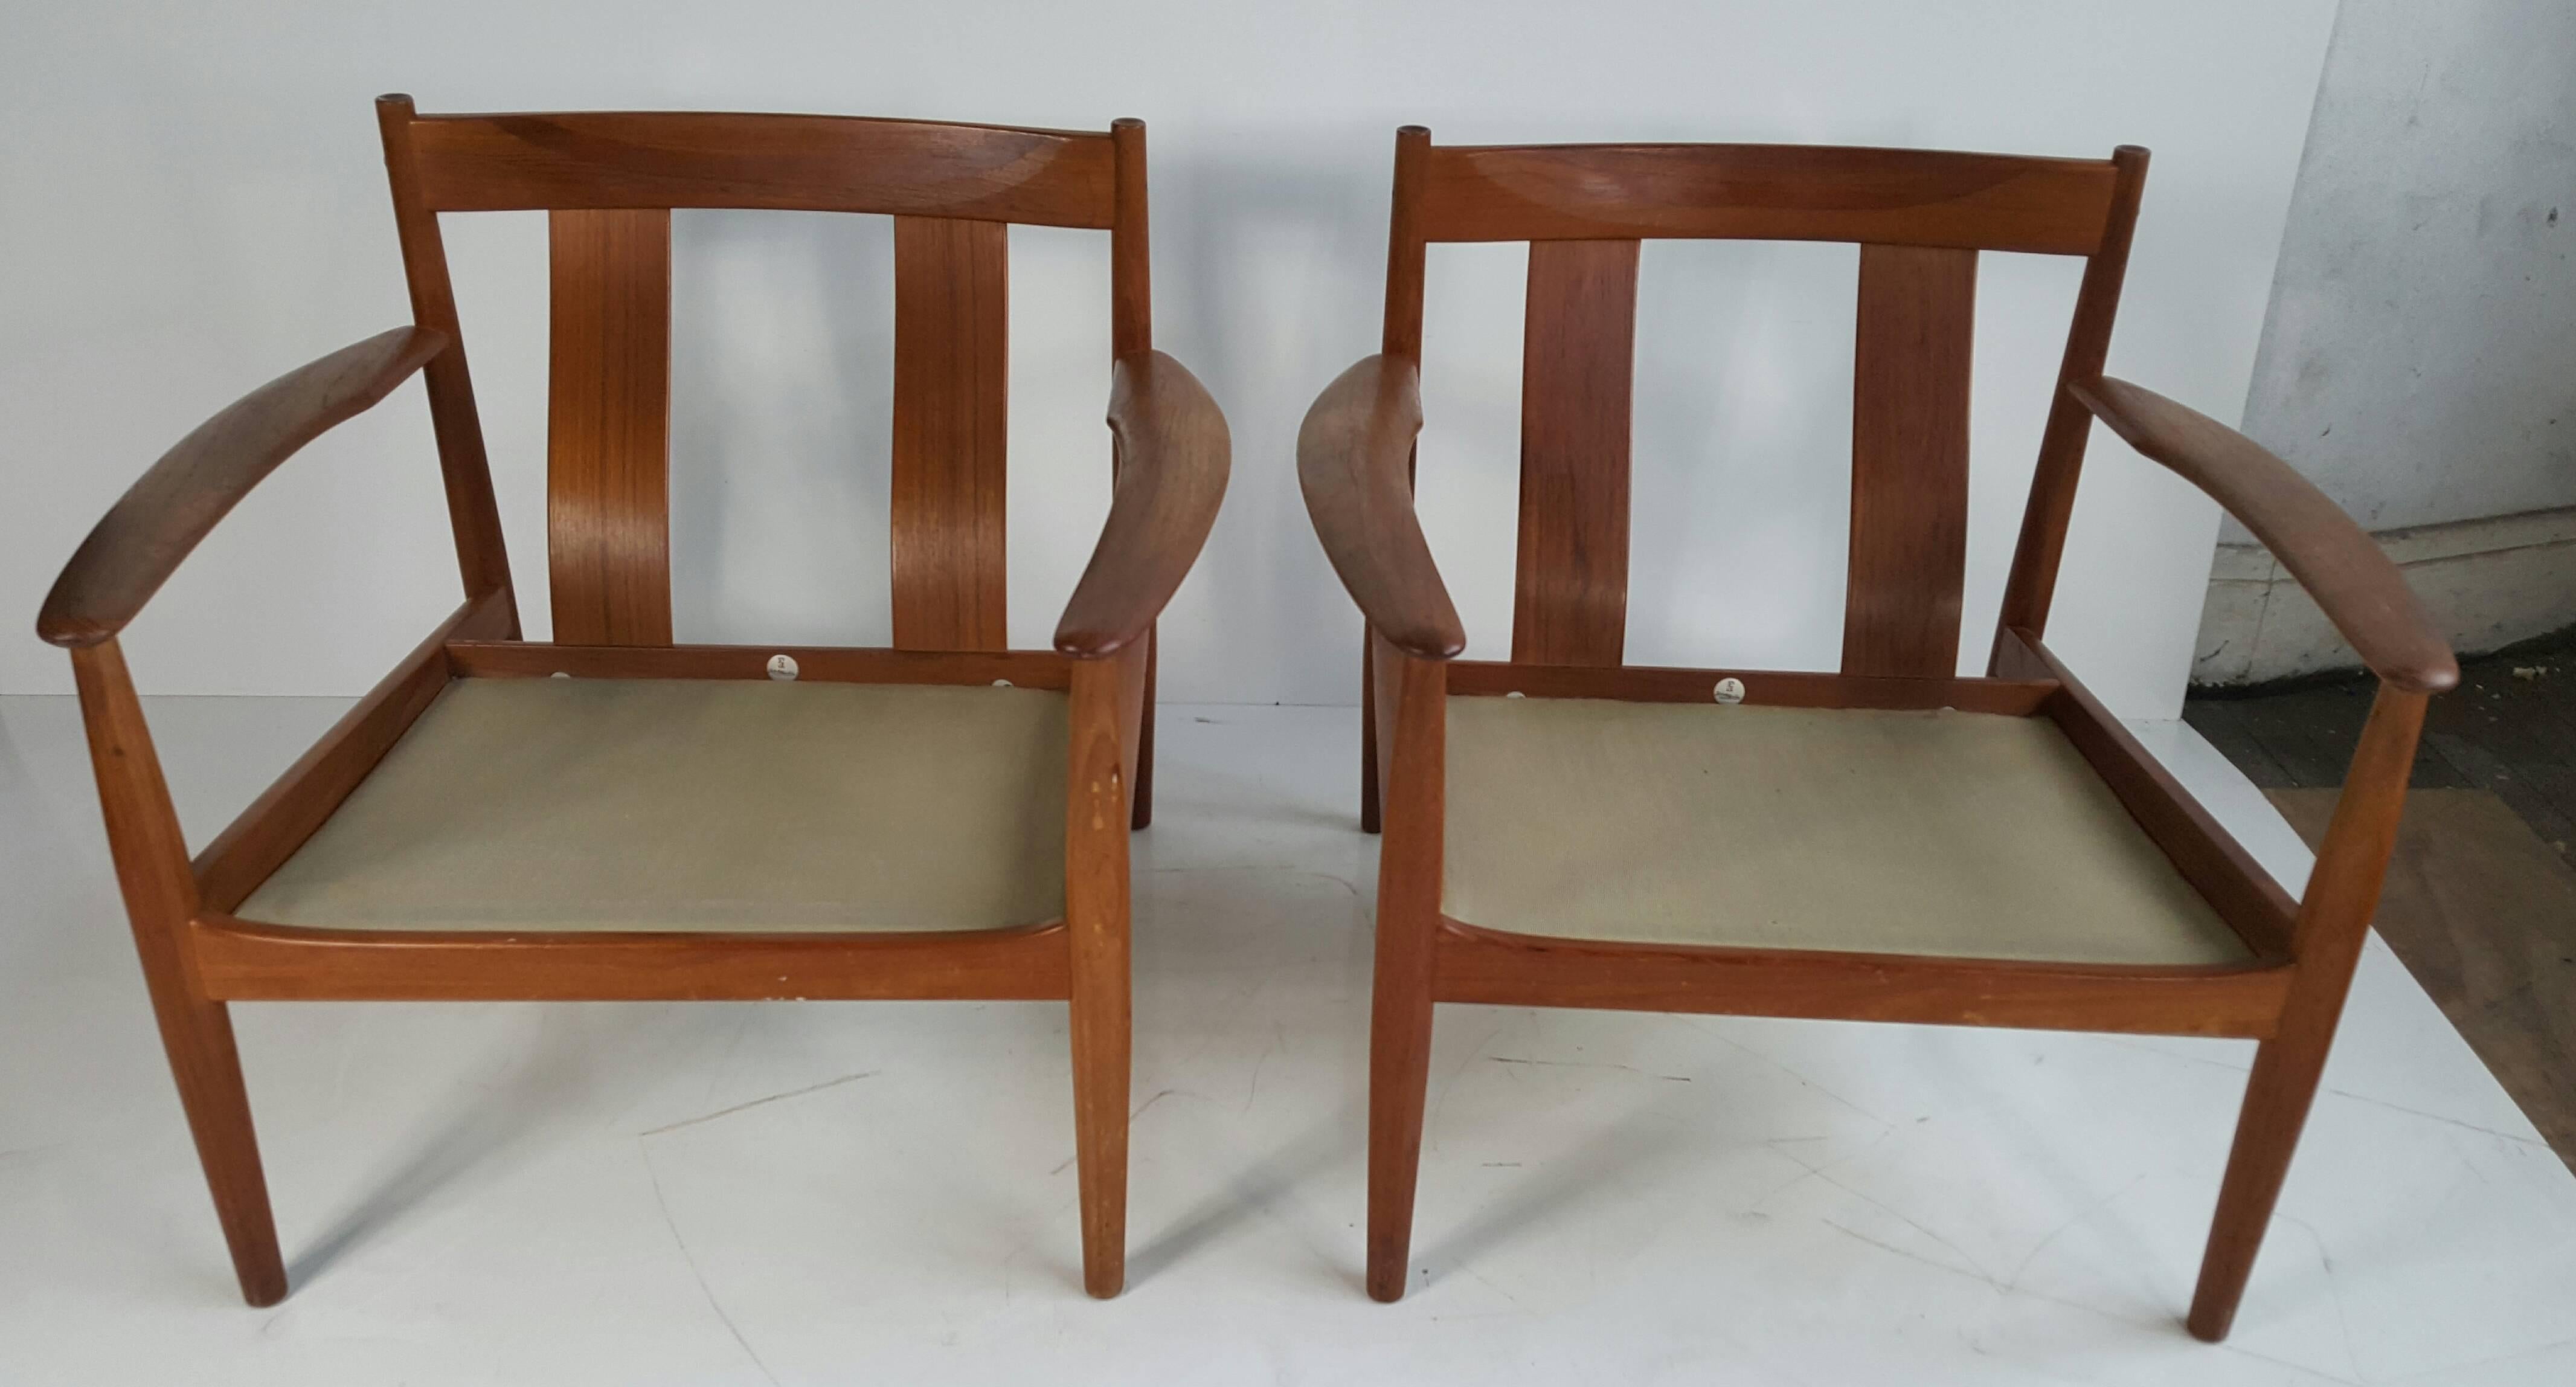 Classic Danish modern pair of lounge chairs, model 118 easy chairs by Grete Jalk for France & Son, Denmark, solid teak wood frames, retains original spring coil seat and back cushions as well as France and Sons Metal badges.